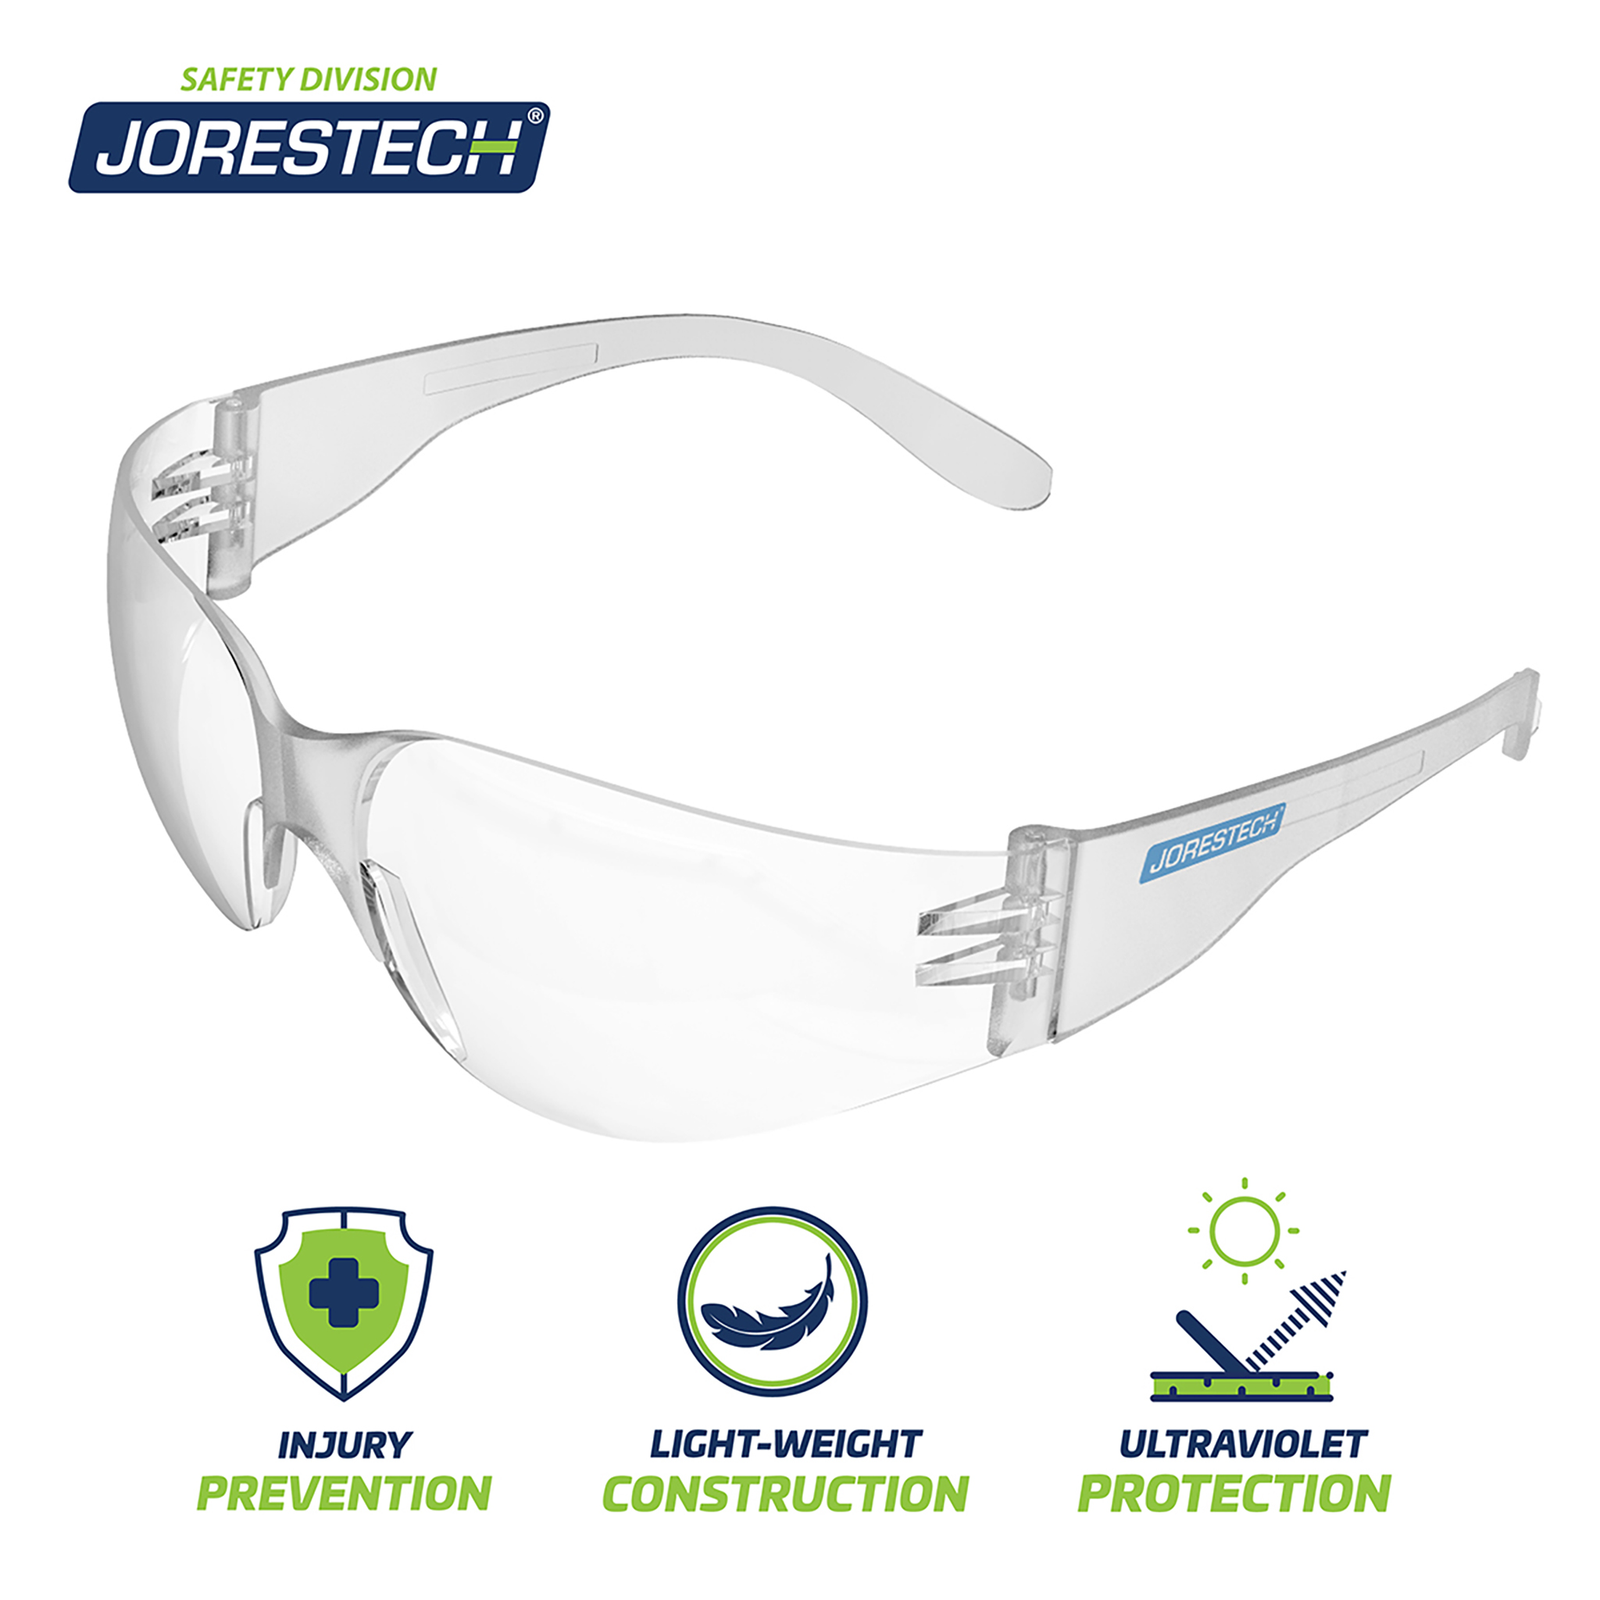 One clear JORESTECH high impact glasses and 3 blue and bright green icons. Icons read: injury prevention, light-weight construction and ultraviolet protection 